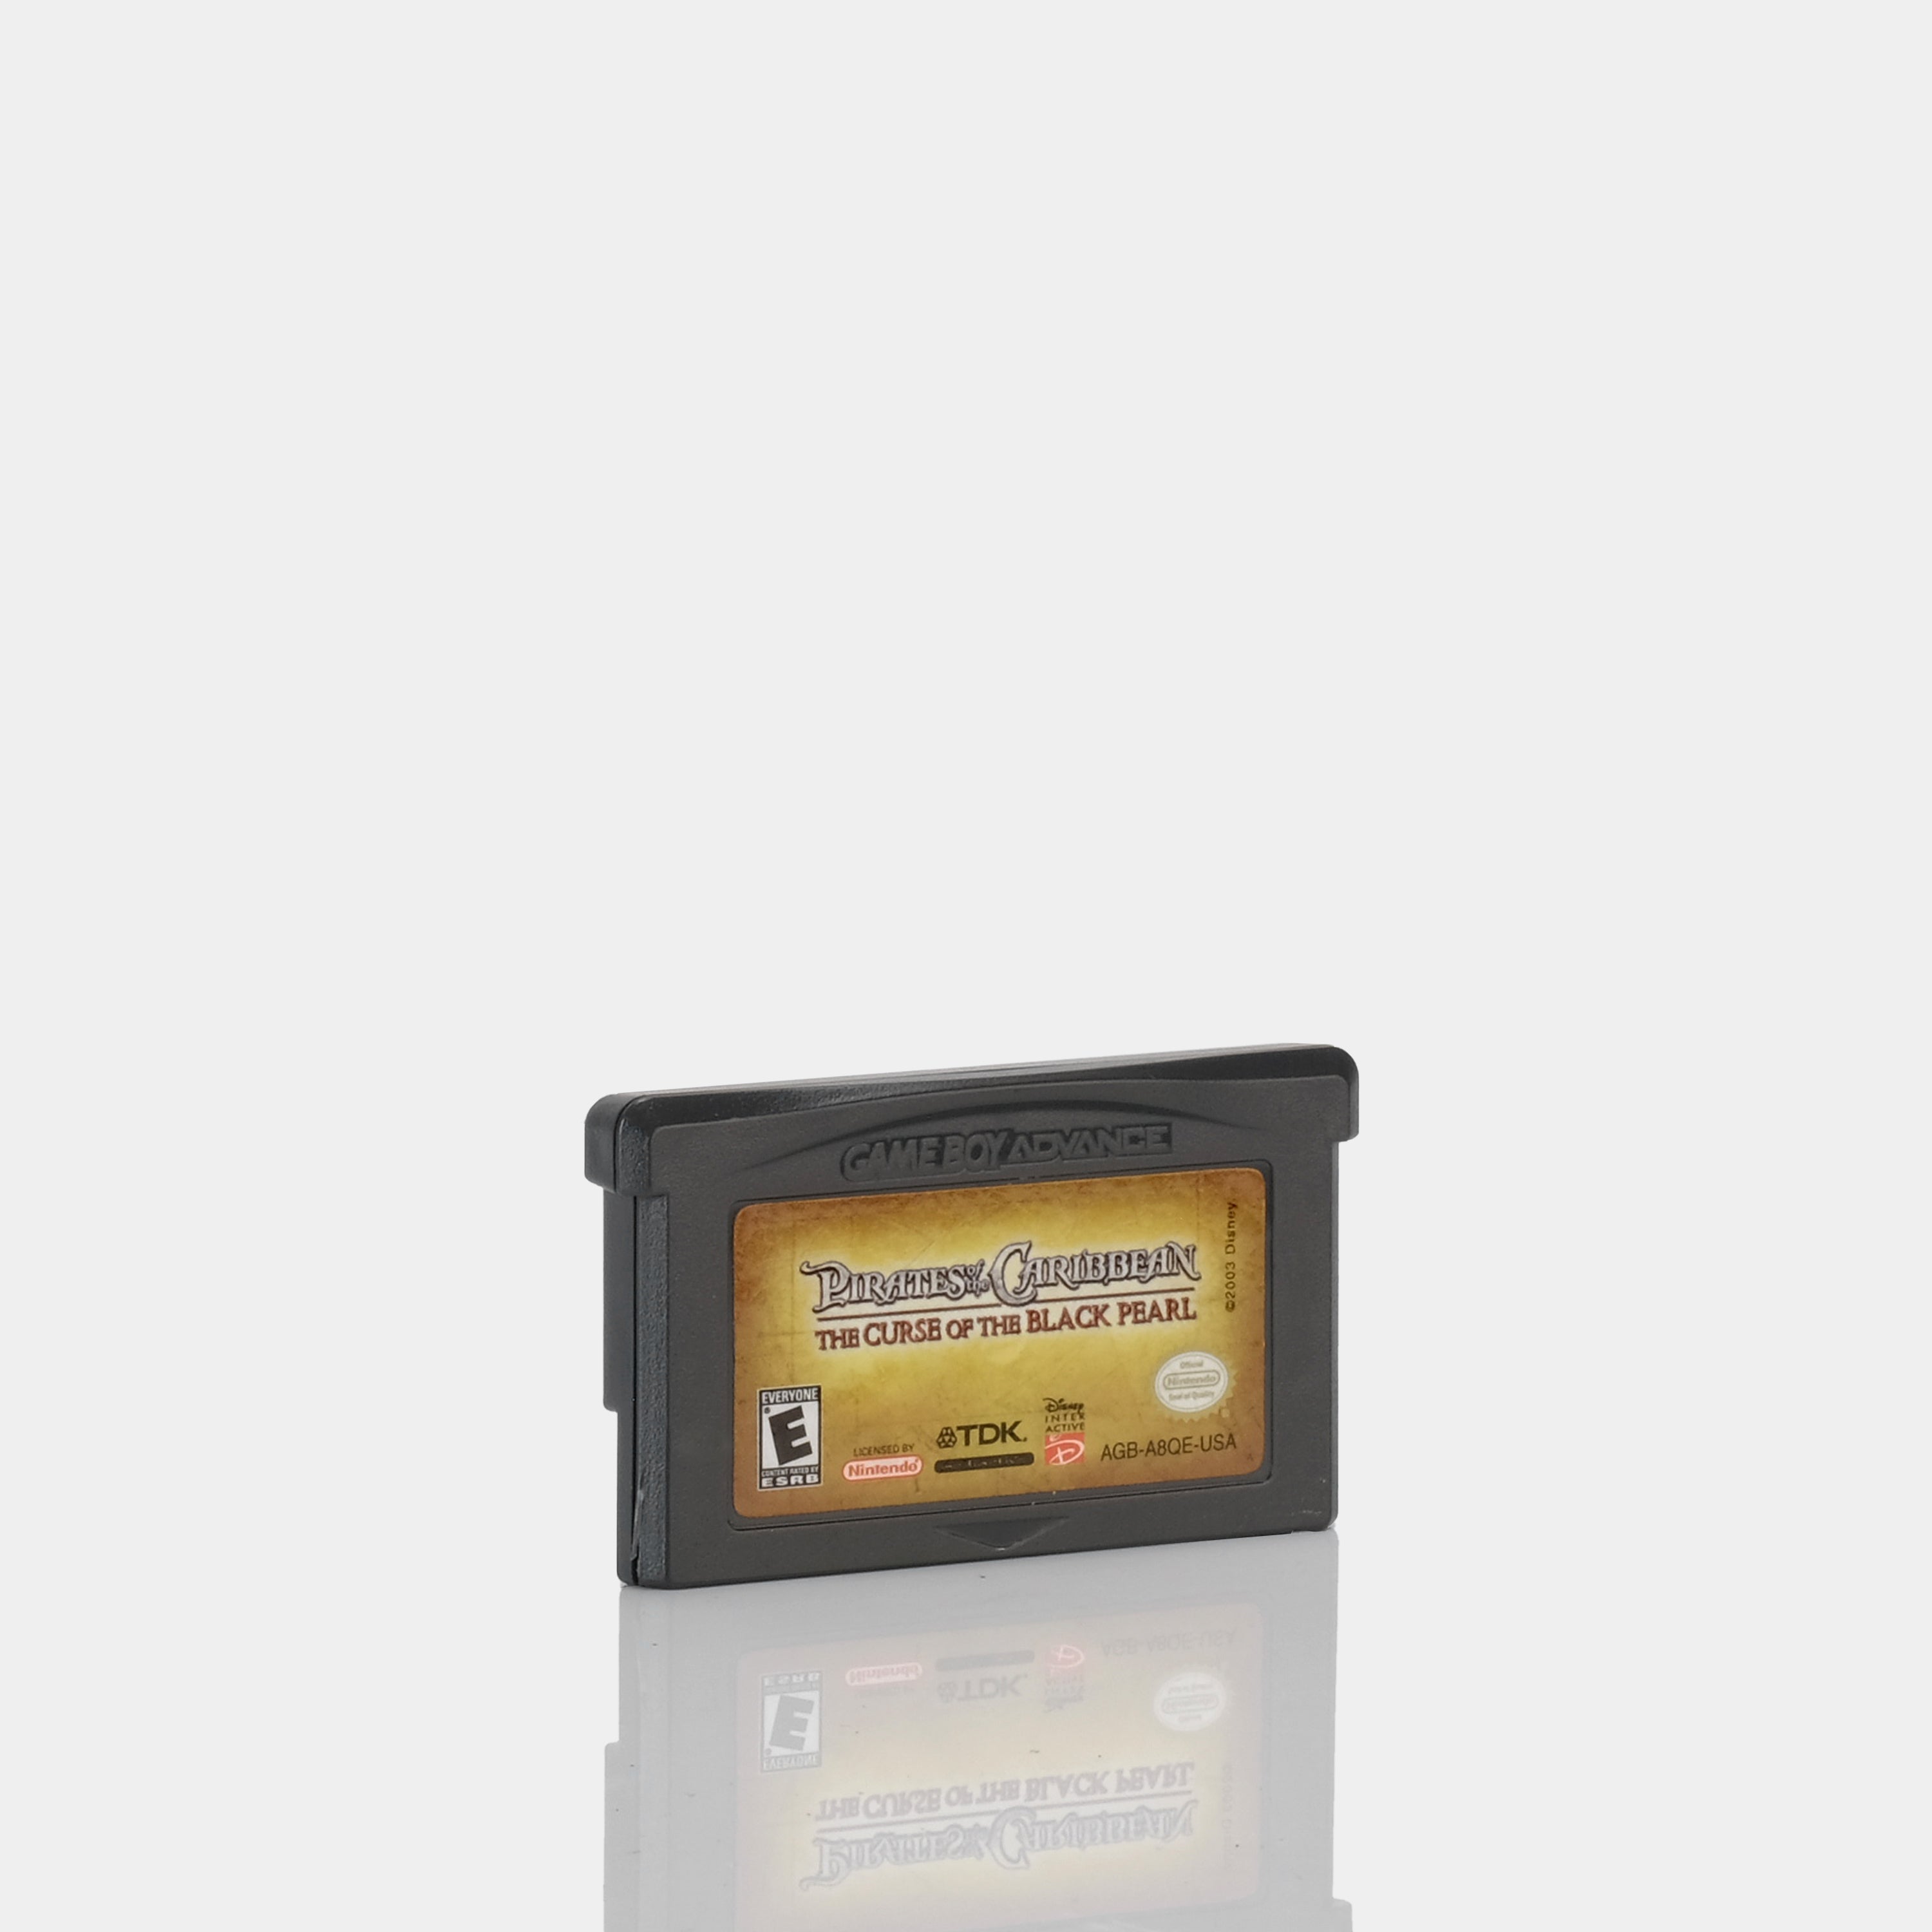 Pirates of the Caribbean: The Curse of the Black Pearl Game Boy Advance Game